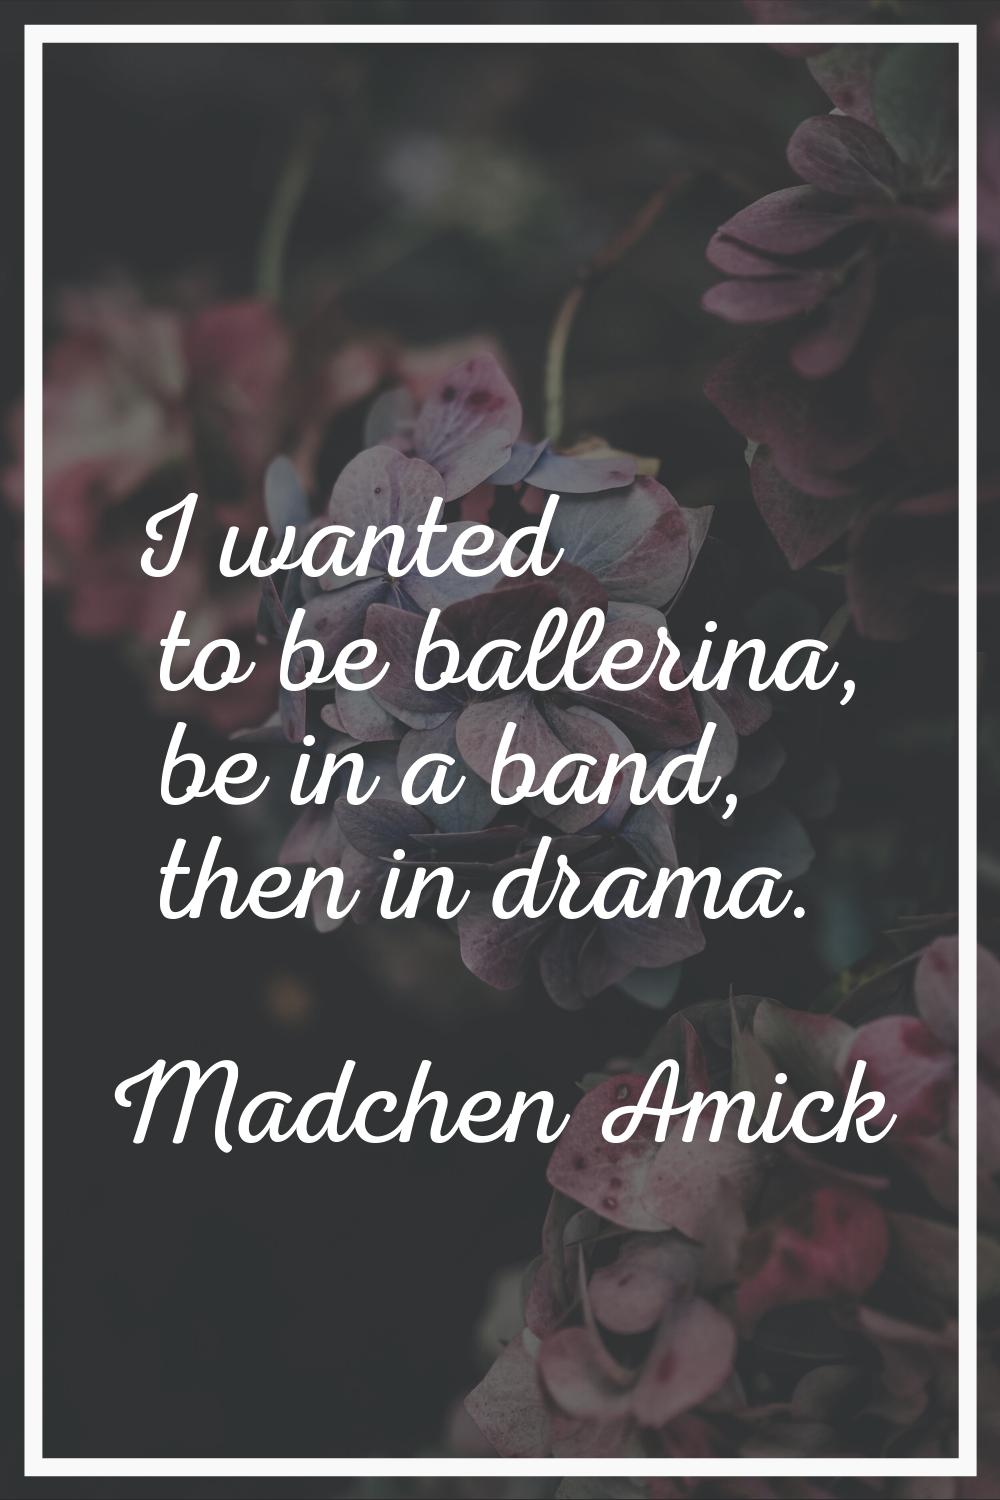 I wanted to be ballerina, be in a band, then in drama.